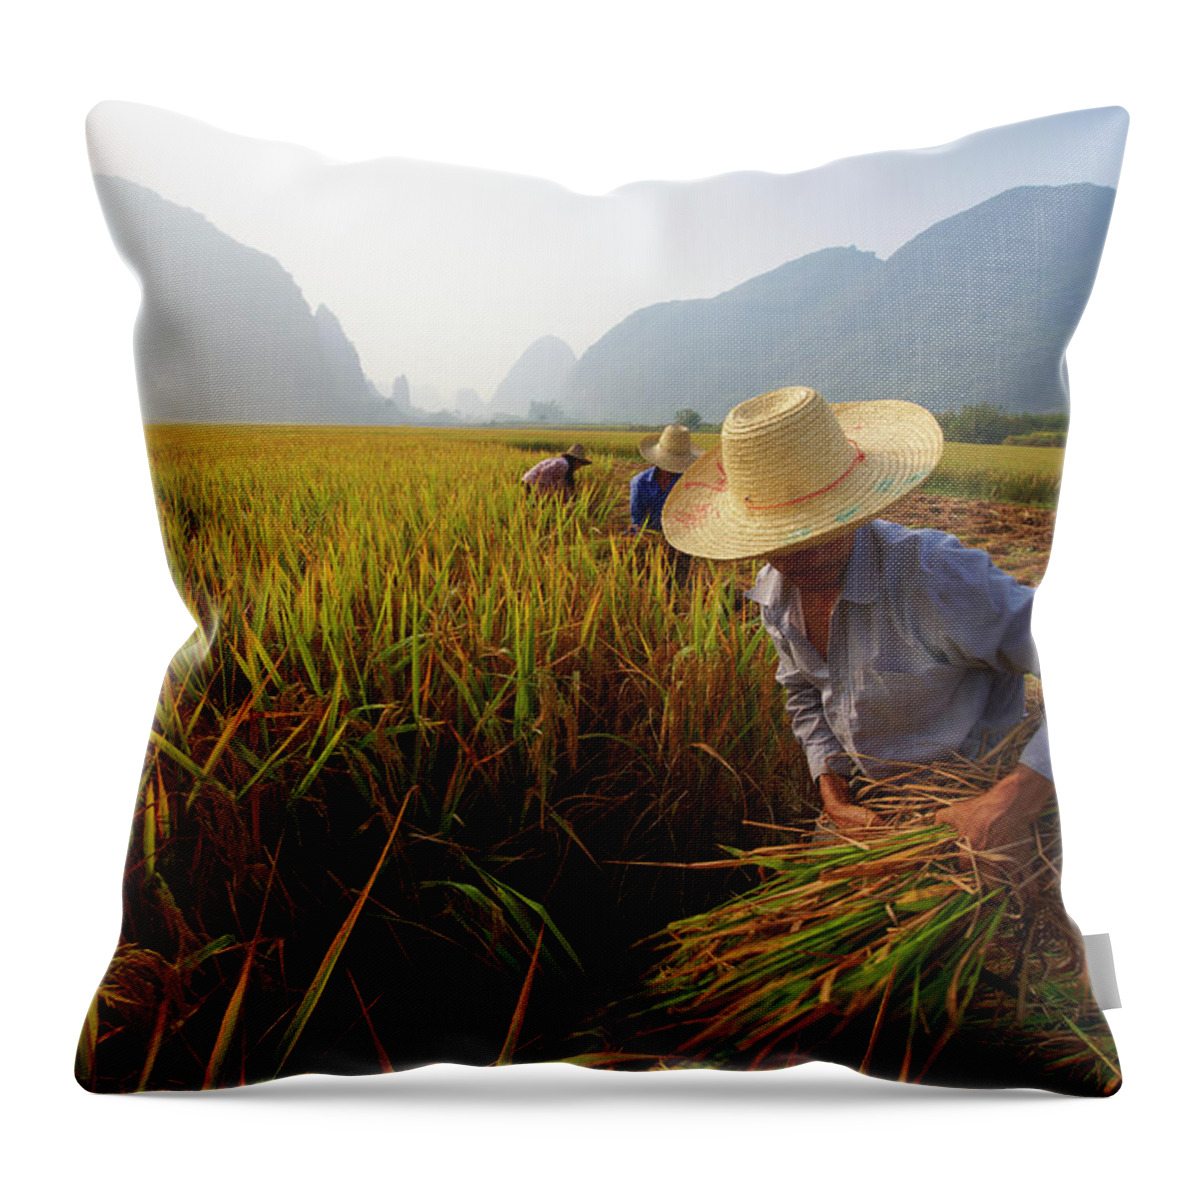 Working Throw Pillow featuring the photograph Harvest On The Rice Field by Tuul & Bruno Morandi